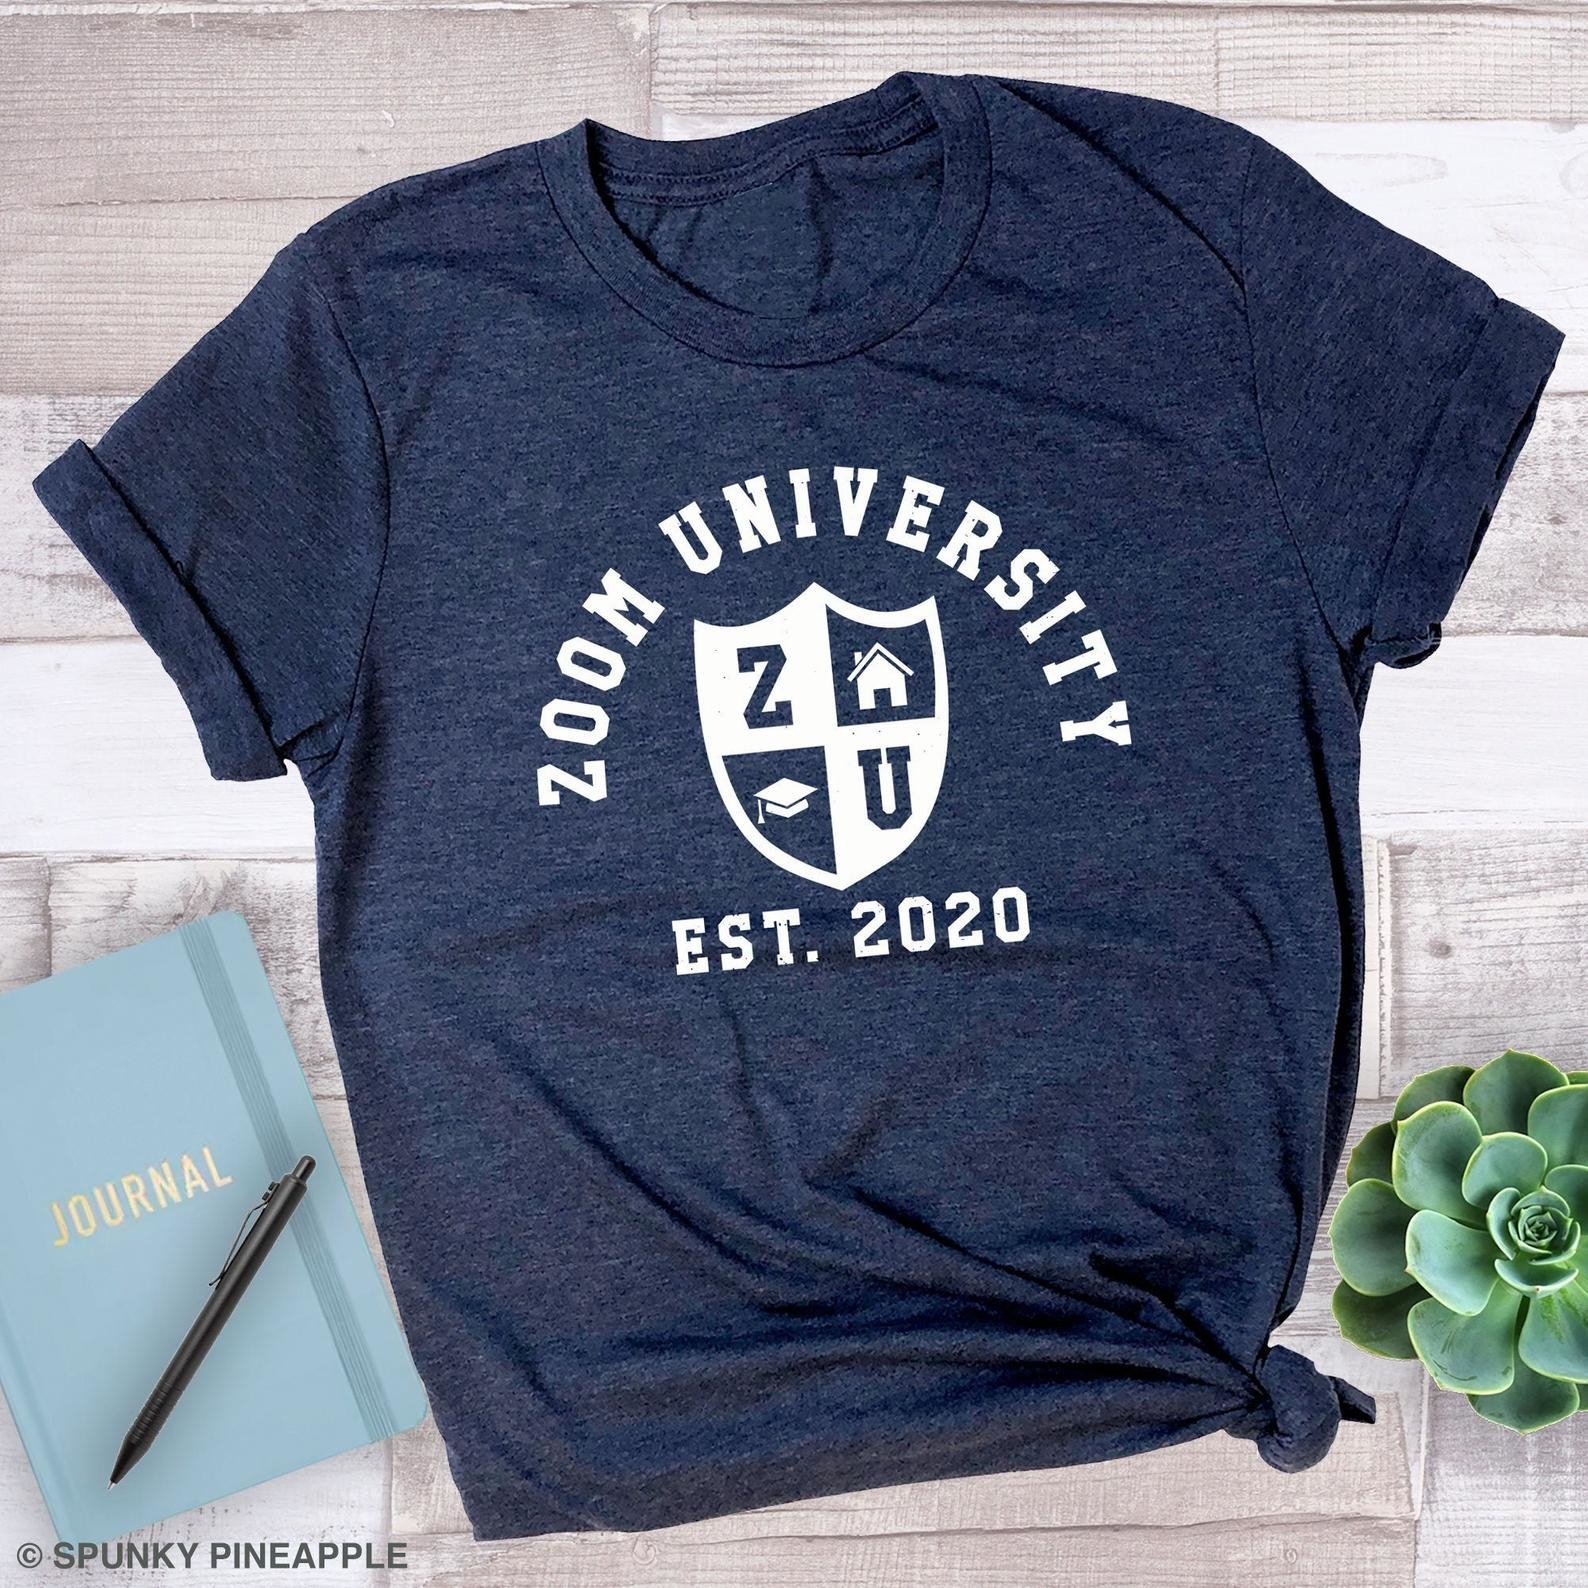 Blue t-shirt with the phrase &quot;Zoom University Est. 2020&quot; and a logo in white on it